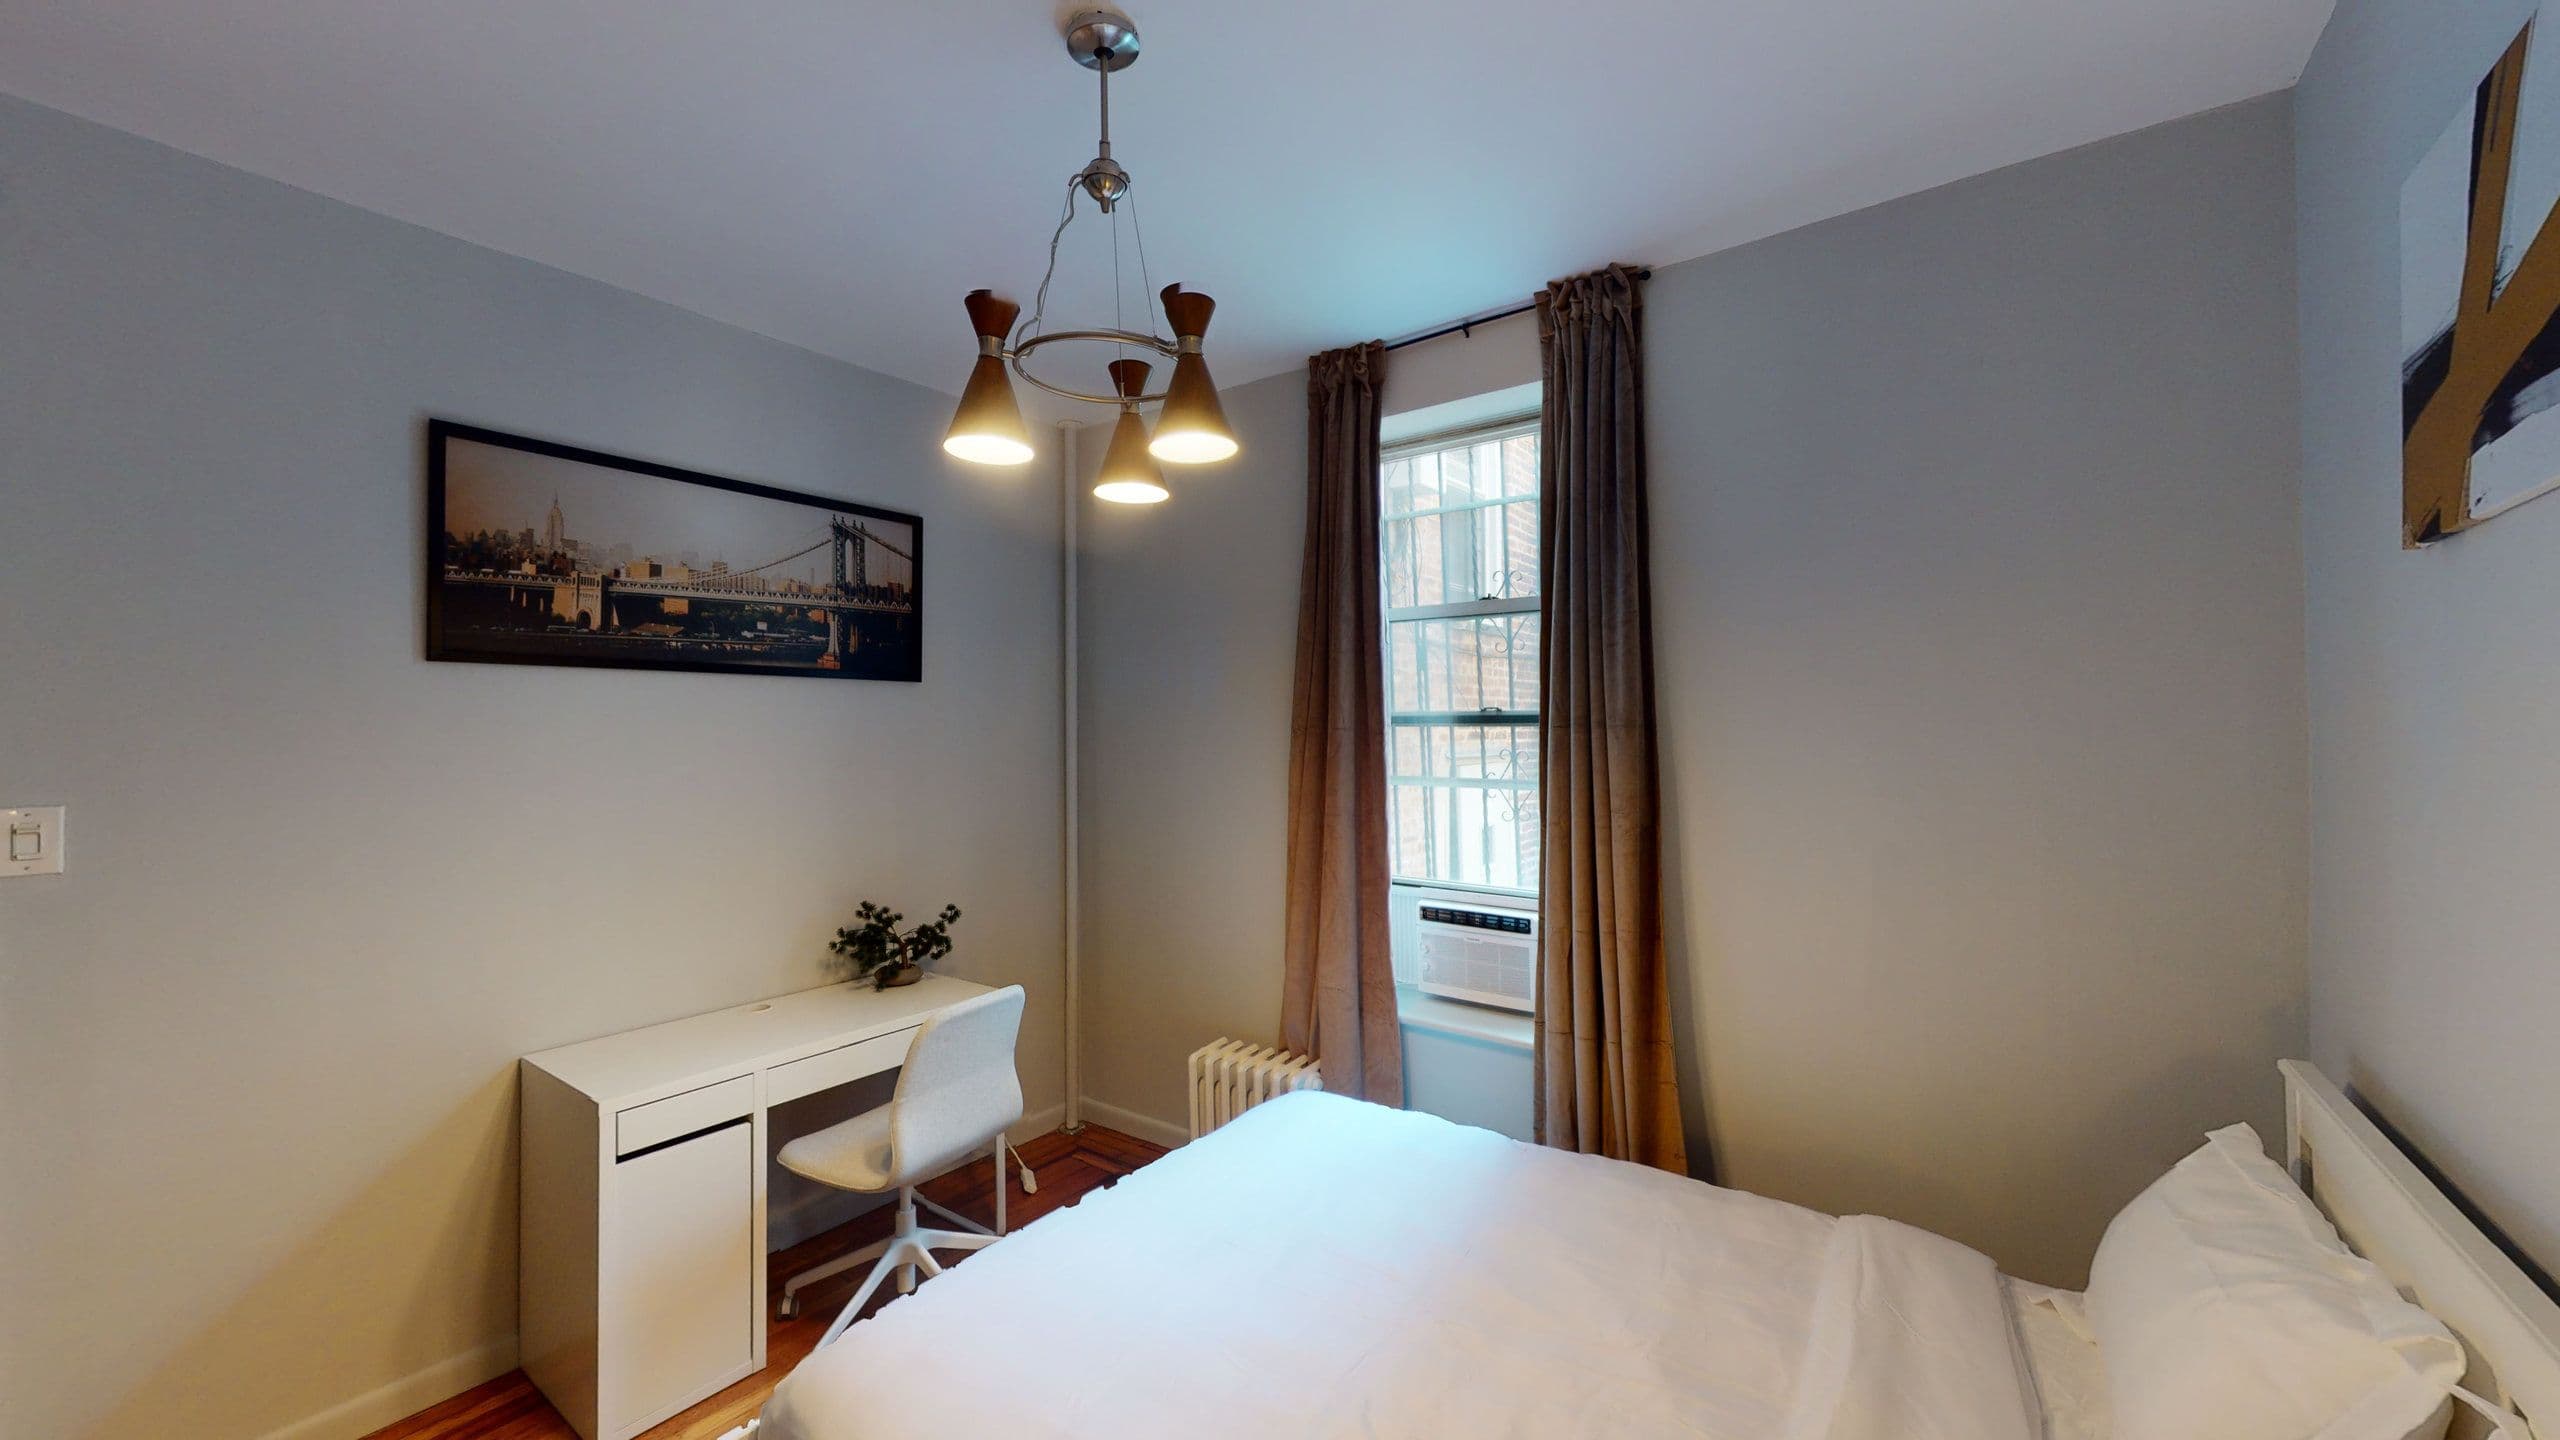 Photo 32 of #1227: Queen Bedroom A at June Homes